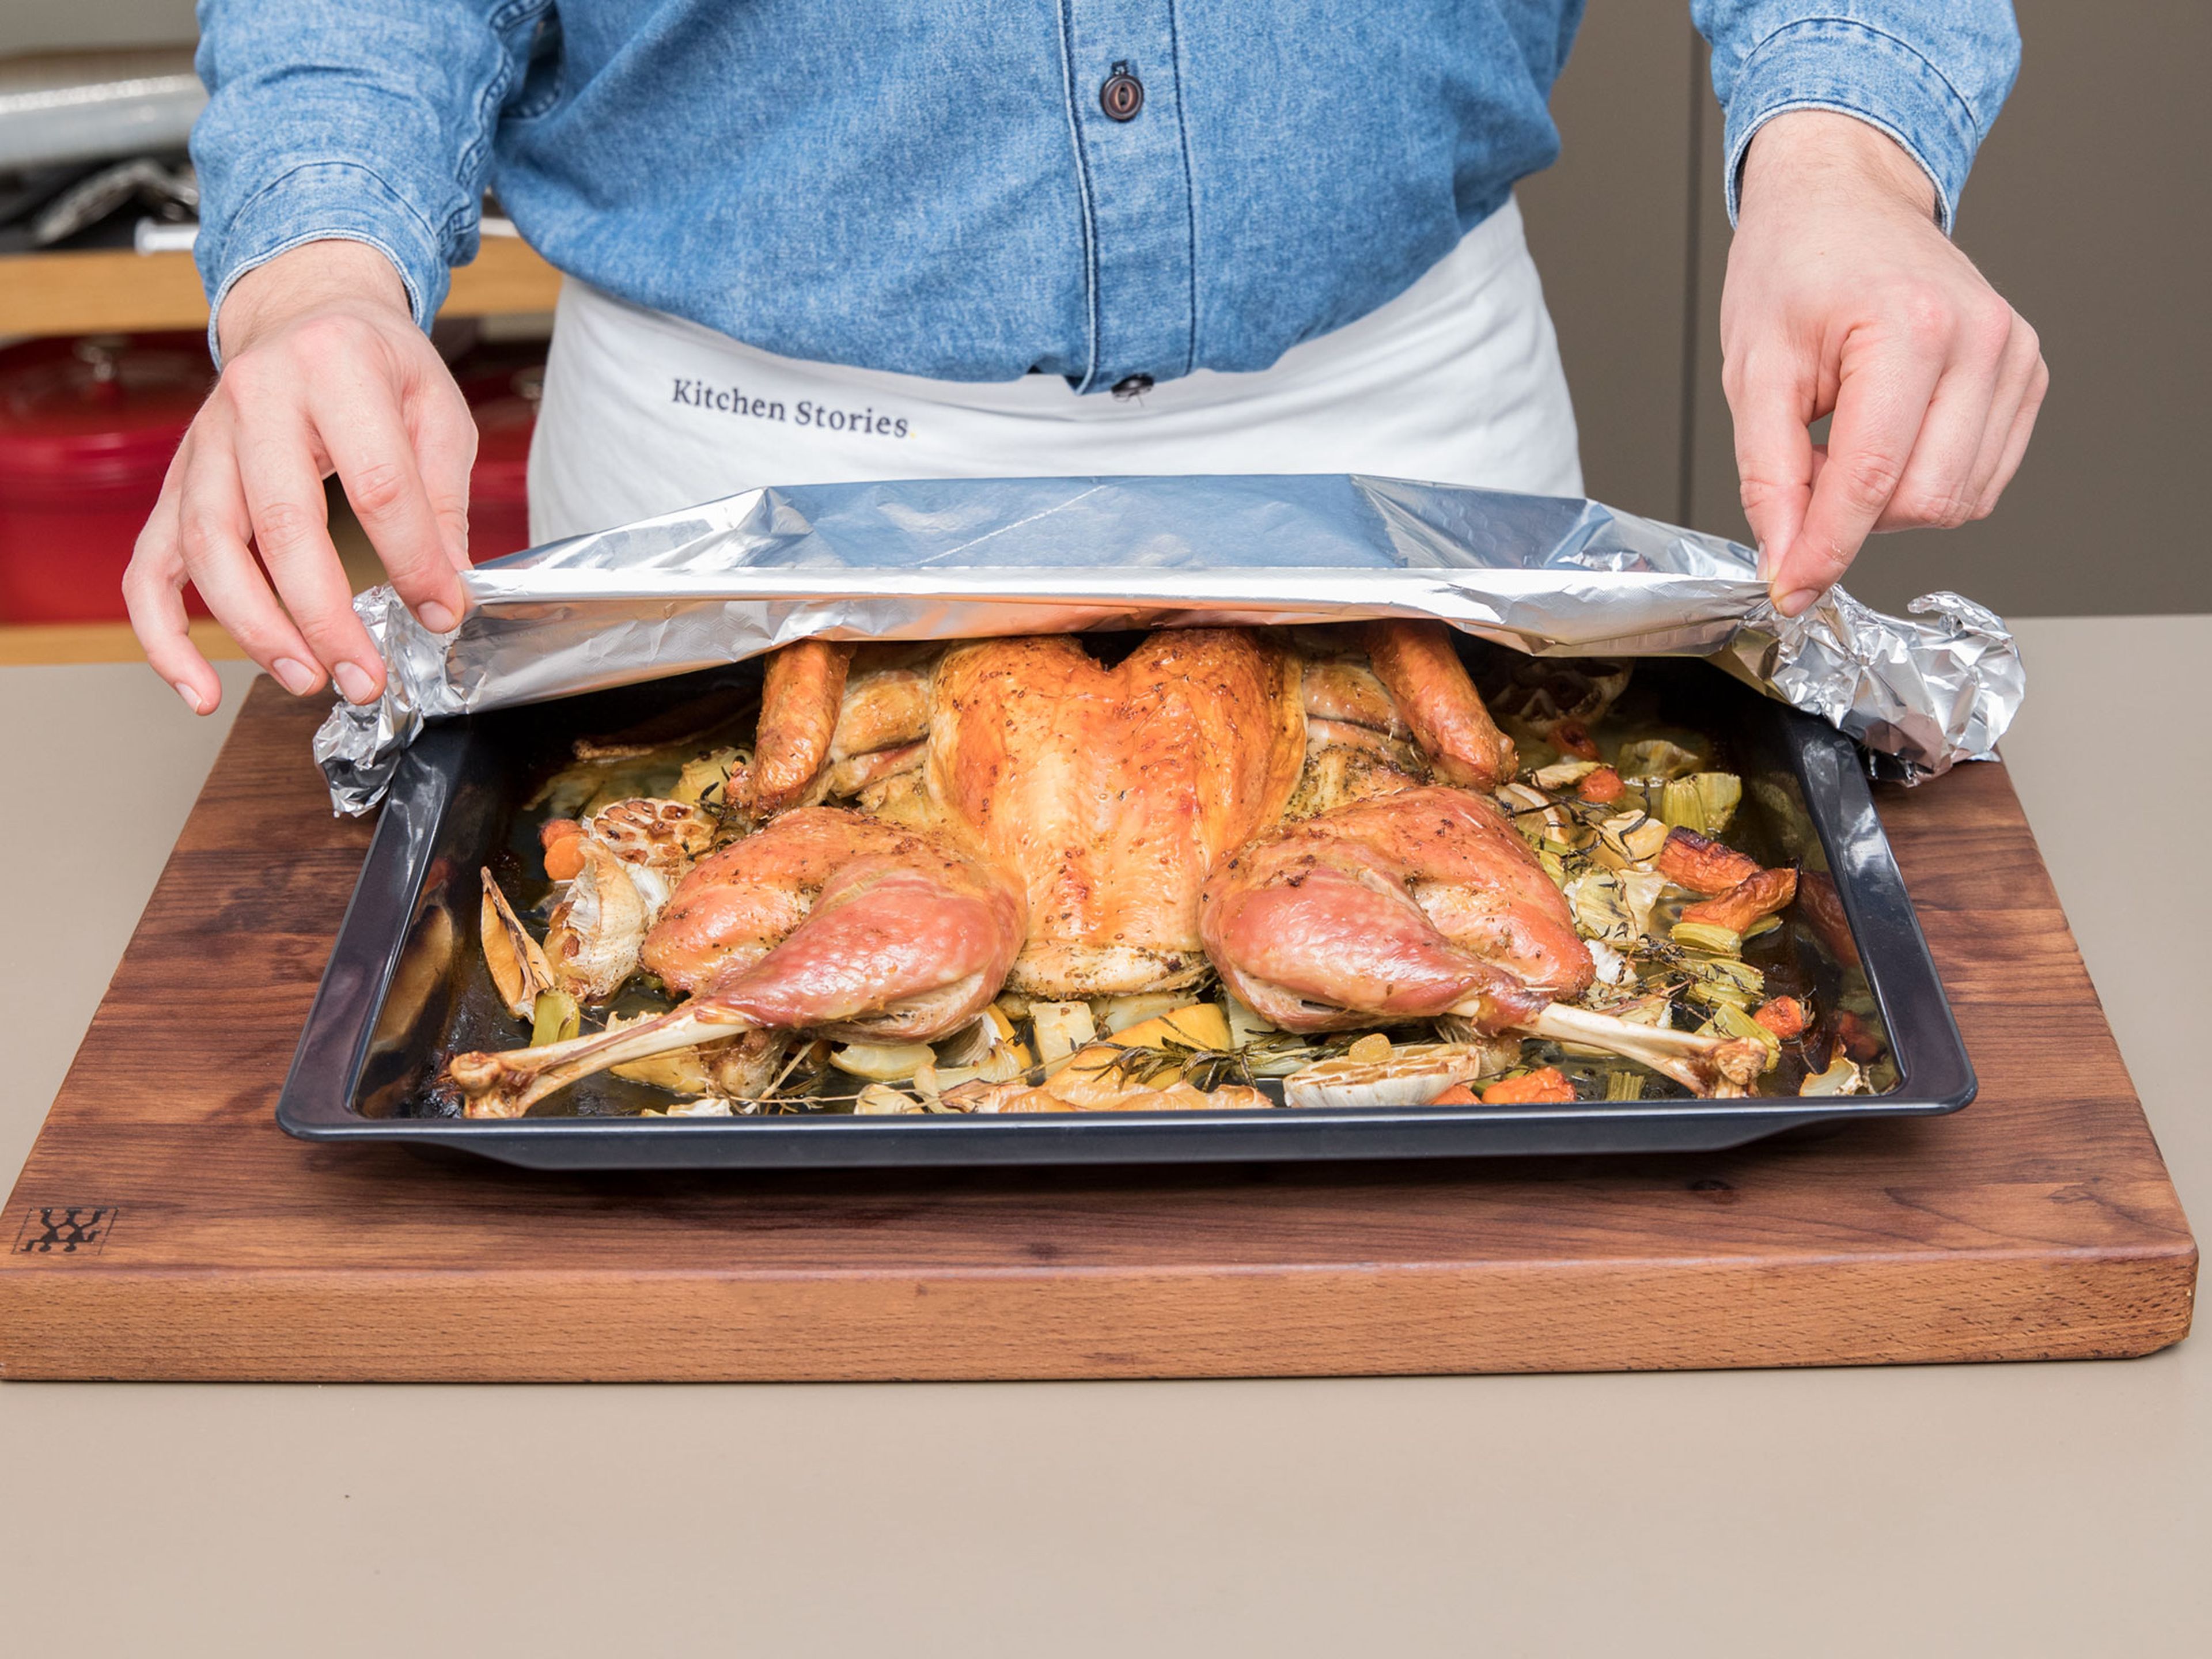 Reduce heat to 180°F/350°F and roast for approx. 60 min. more, brushing turkey with remaining aromatic orange oil every 15 min. Remove from the oven, cover with aluminum foil, and allow to rest for approx. 30 min. before serving.